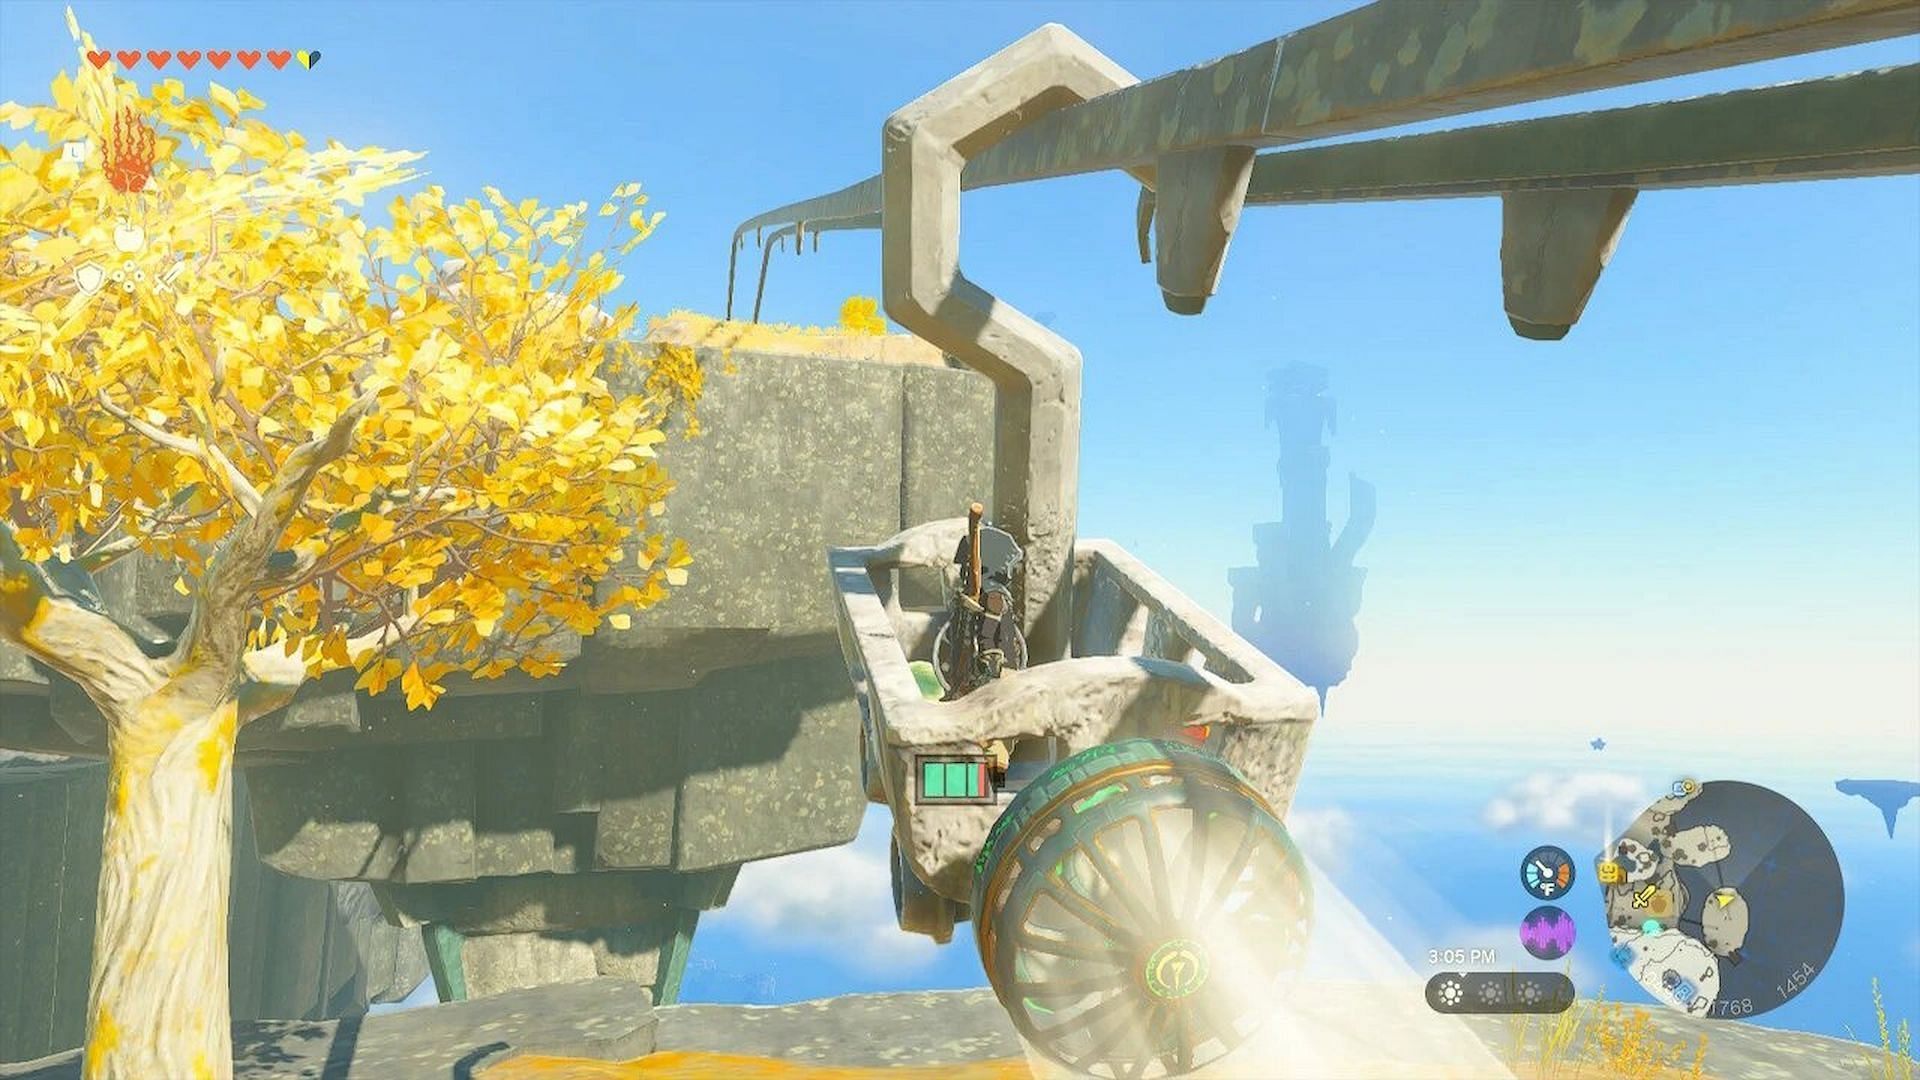 You can attach a hook and a fan to the mine cart to cross the broken rails in Legend of Zelda Tears of the Kingdom (Image via Nintendo)